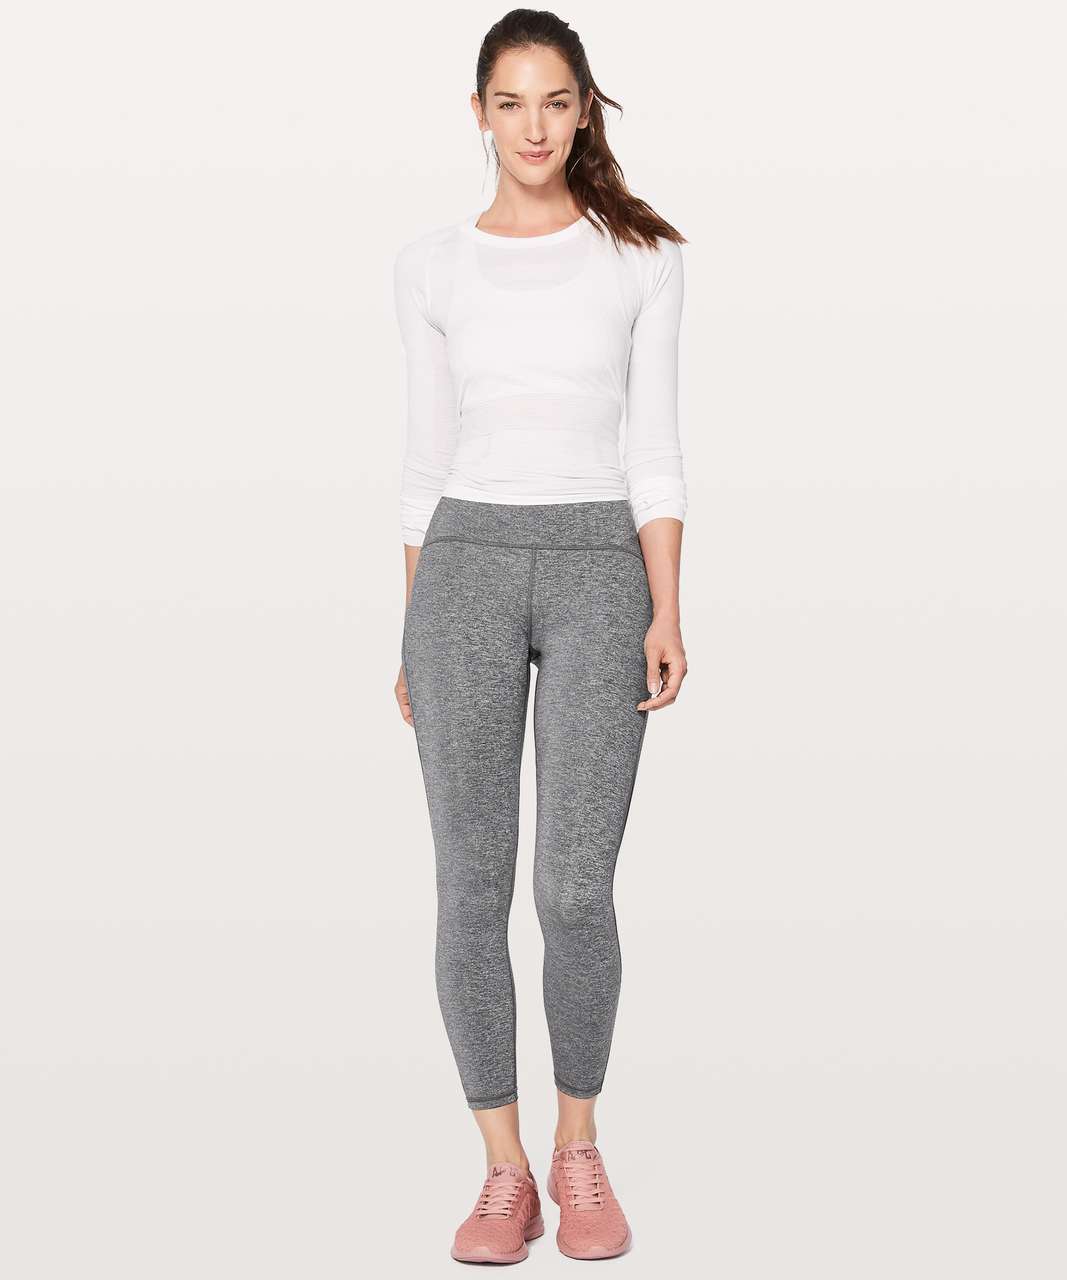 Lululemon Train Times 7/8 Pant *25" - Heathered Black (First Release)